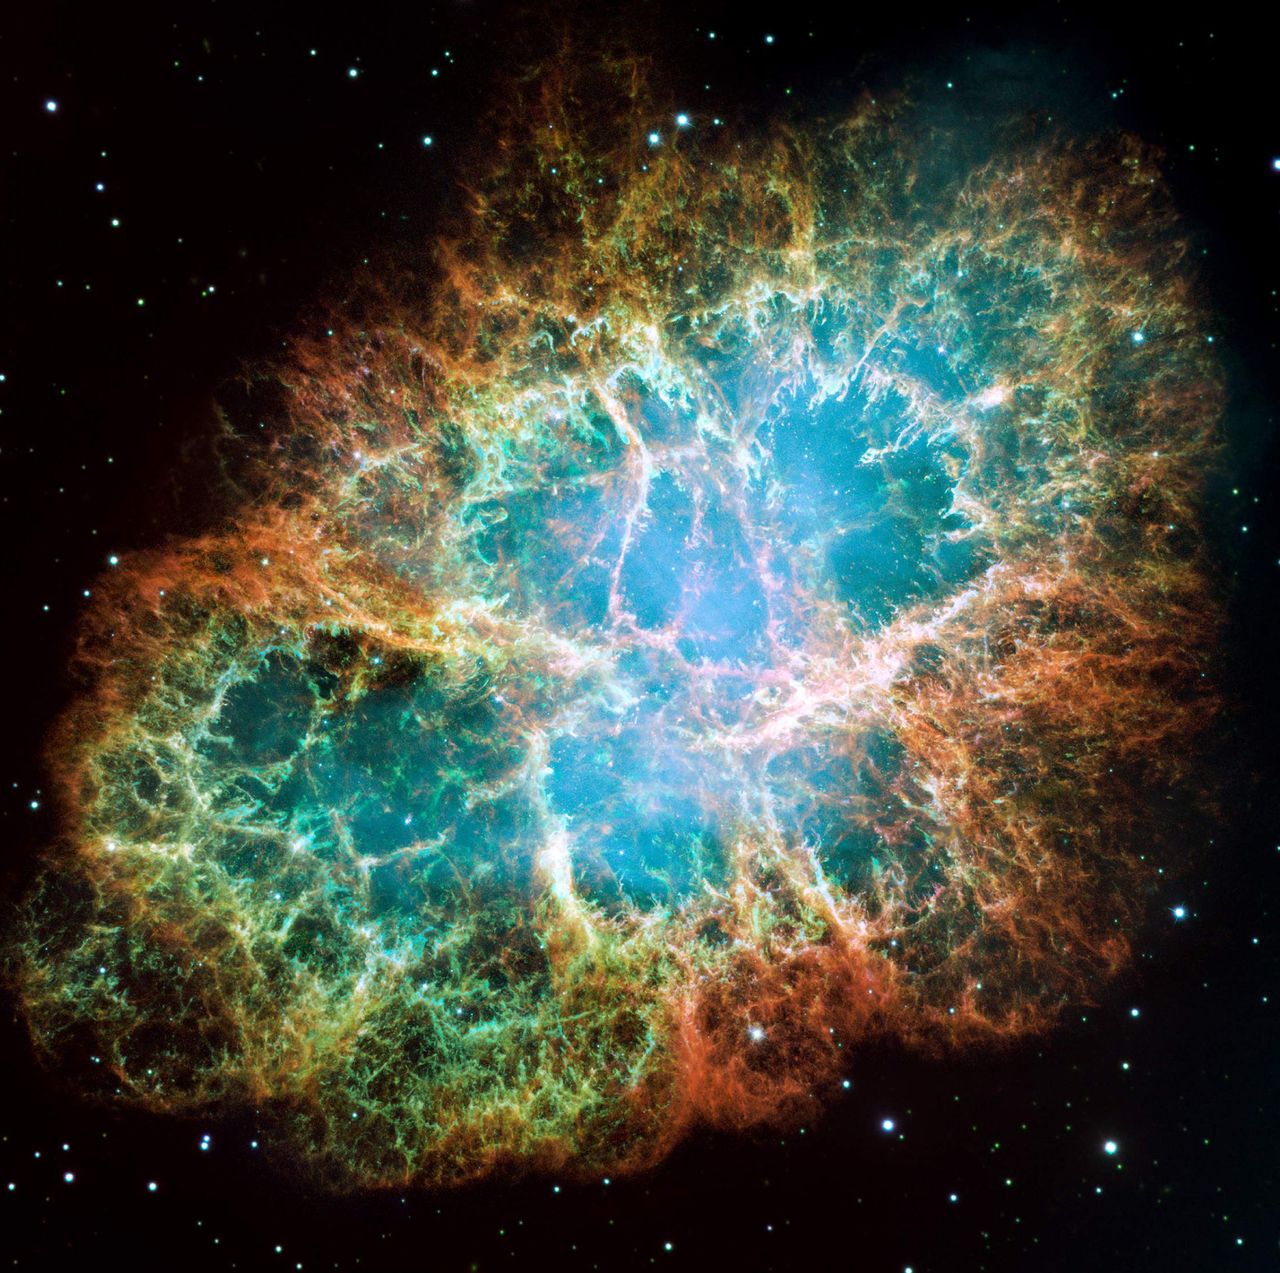 The Crab Nebula, is a six-light-year-wide expanding remnant of a star's supernova explosion.